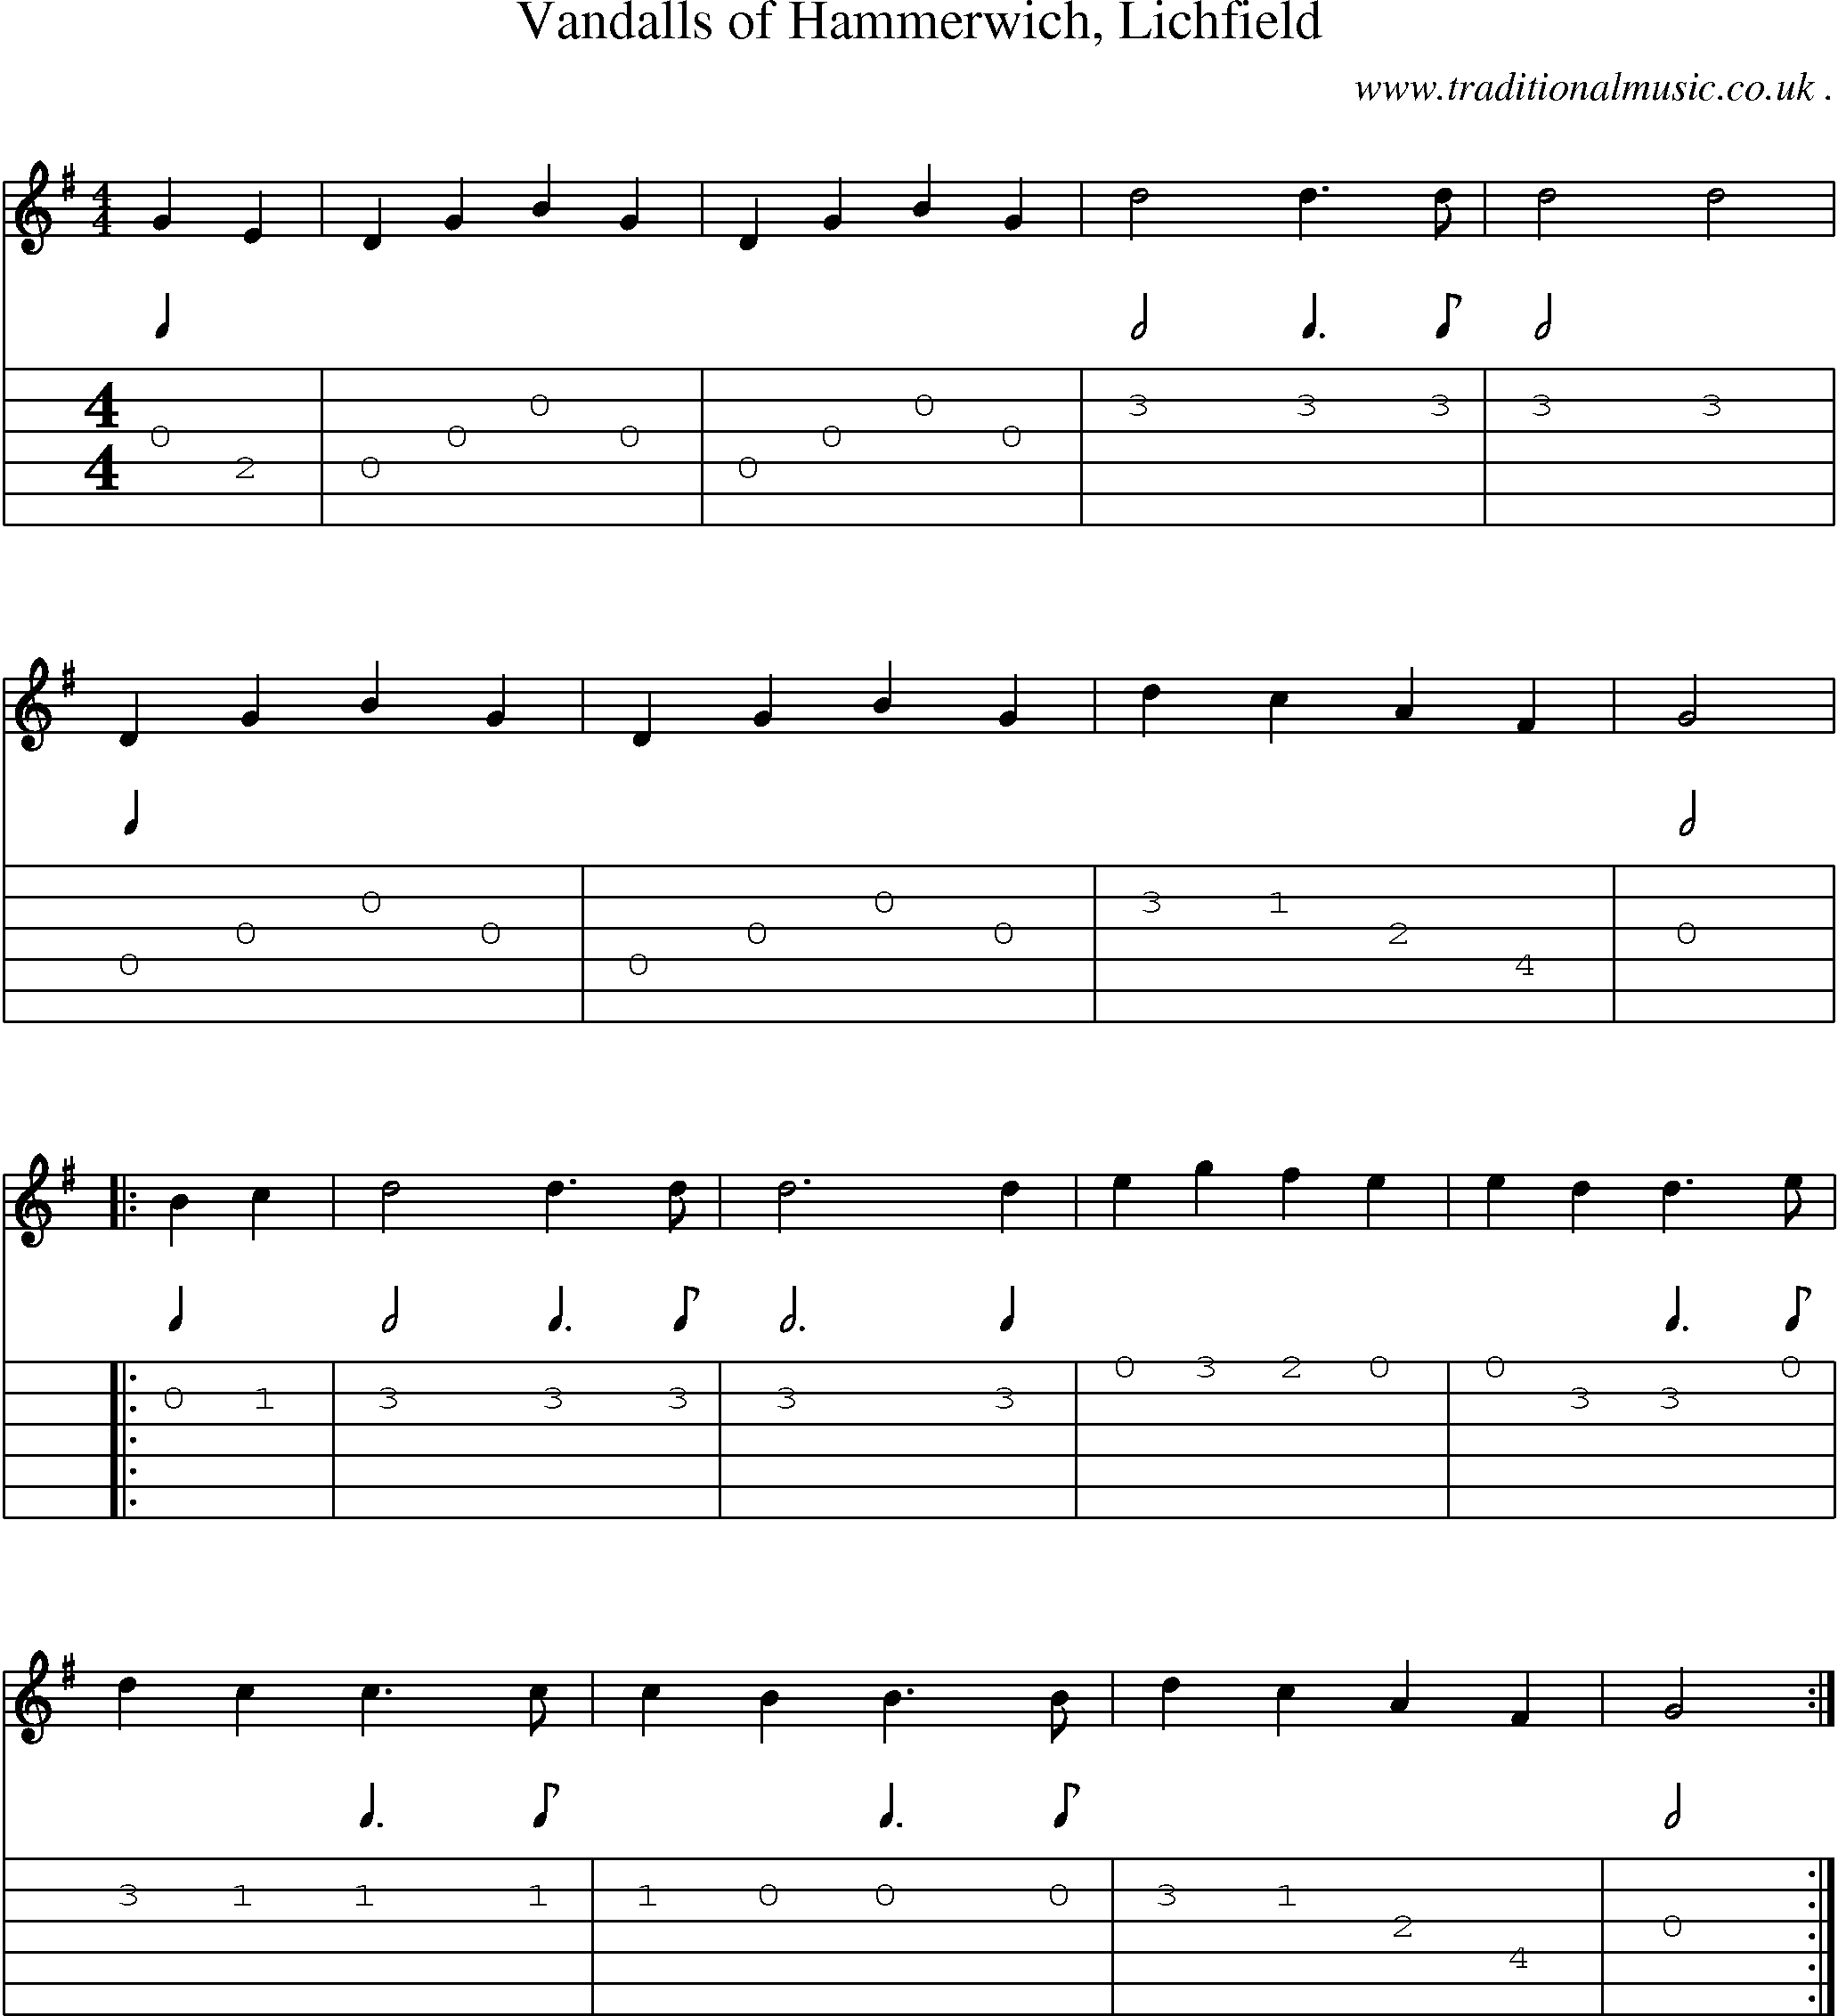 Sheet-Music and Guitar Tabs for Vandalls Of Hammerwich Lichfield